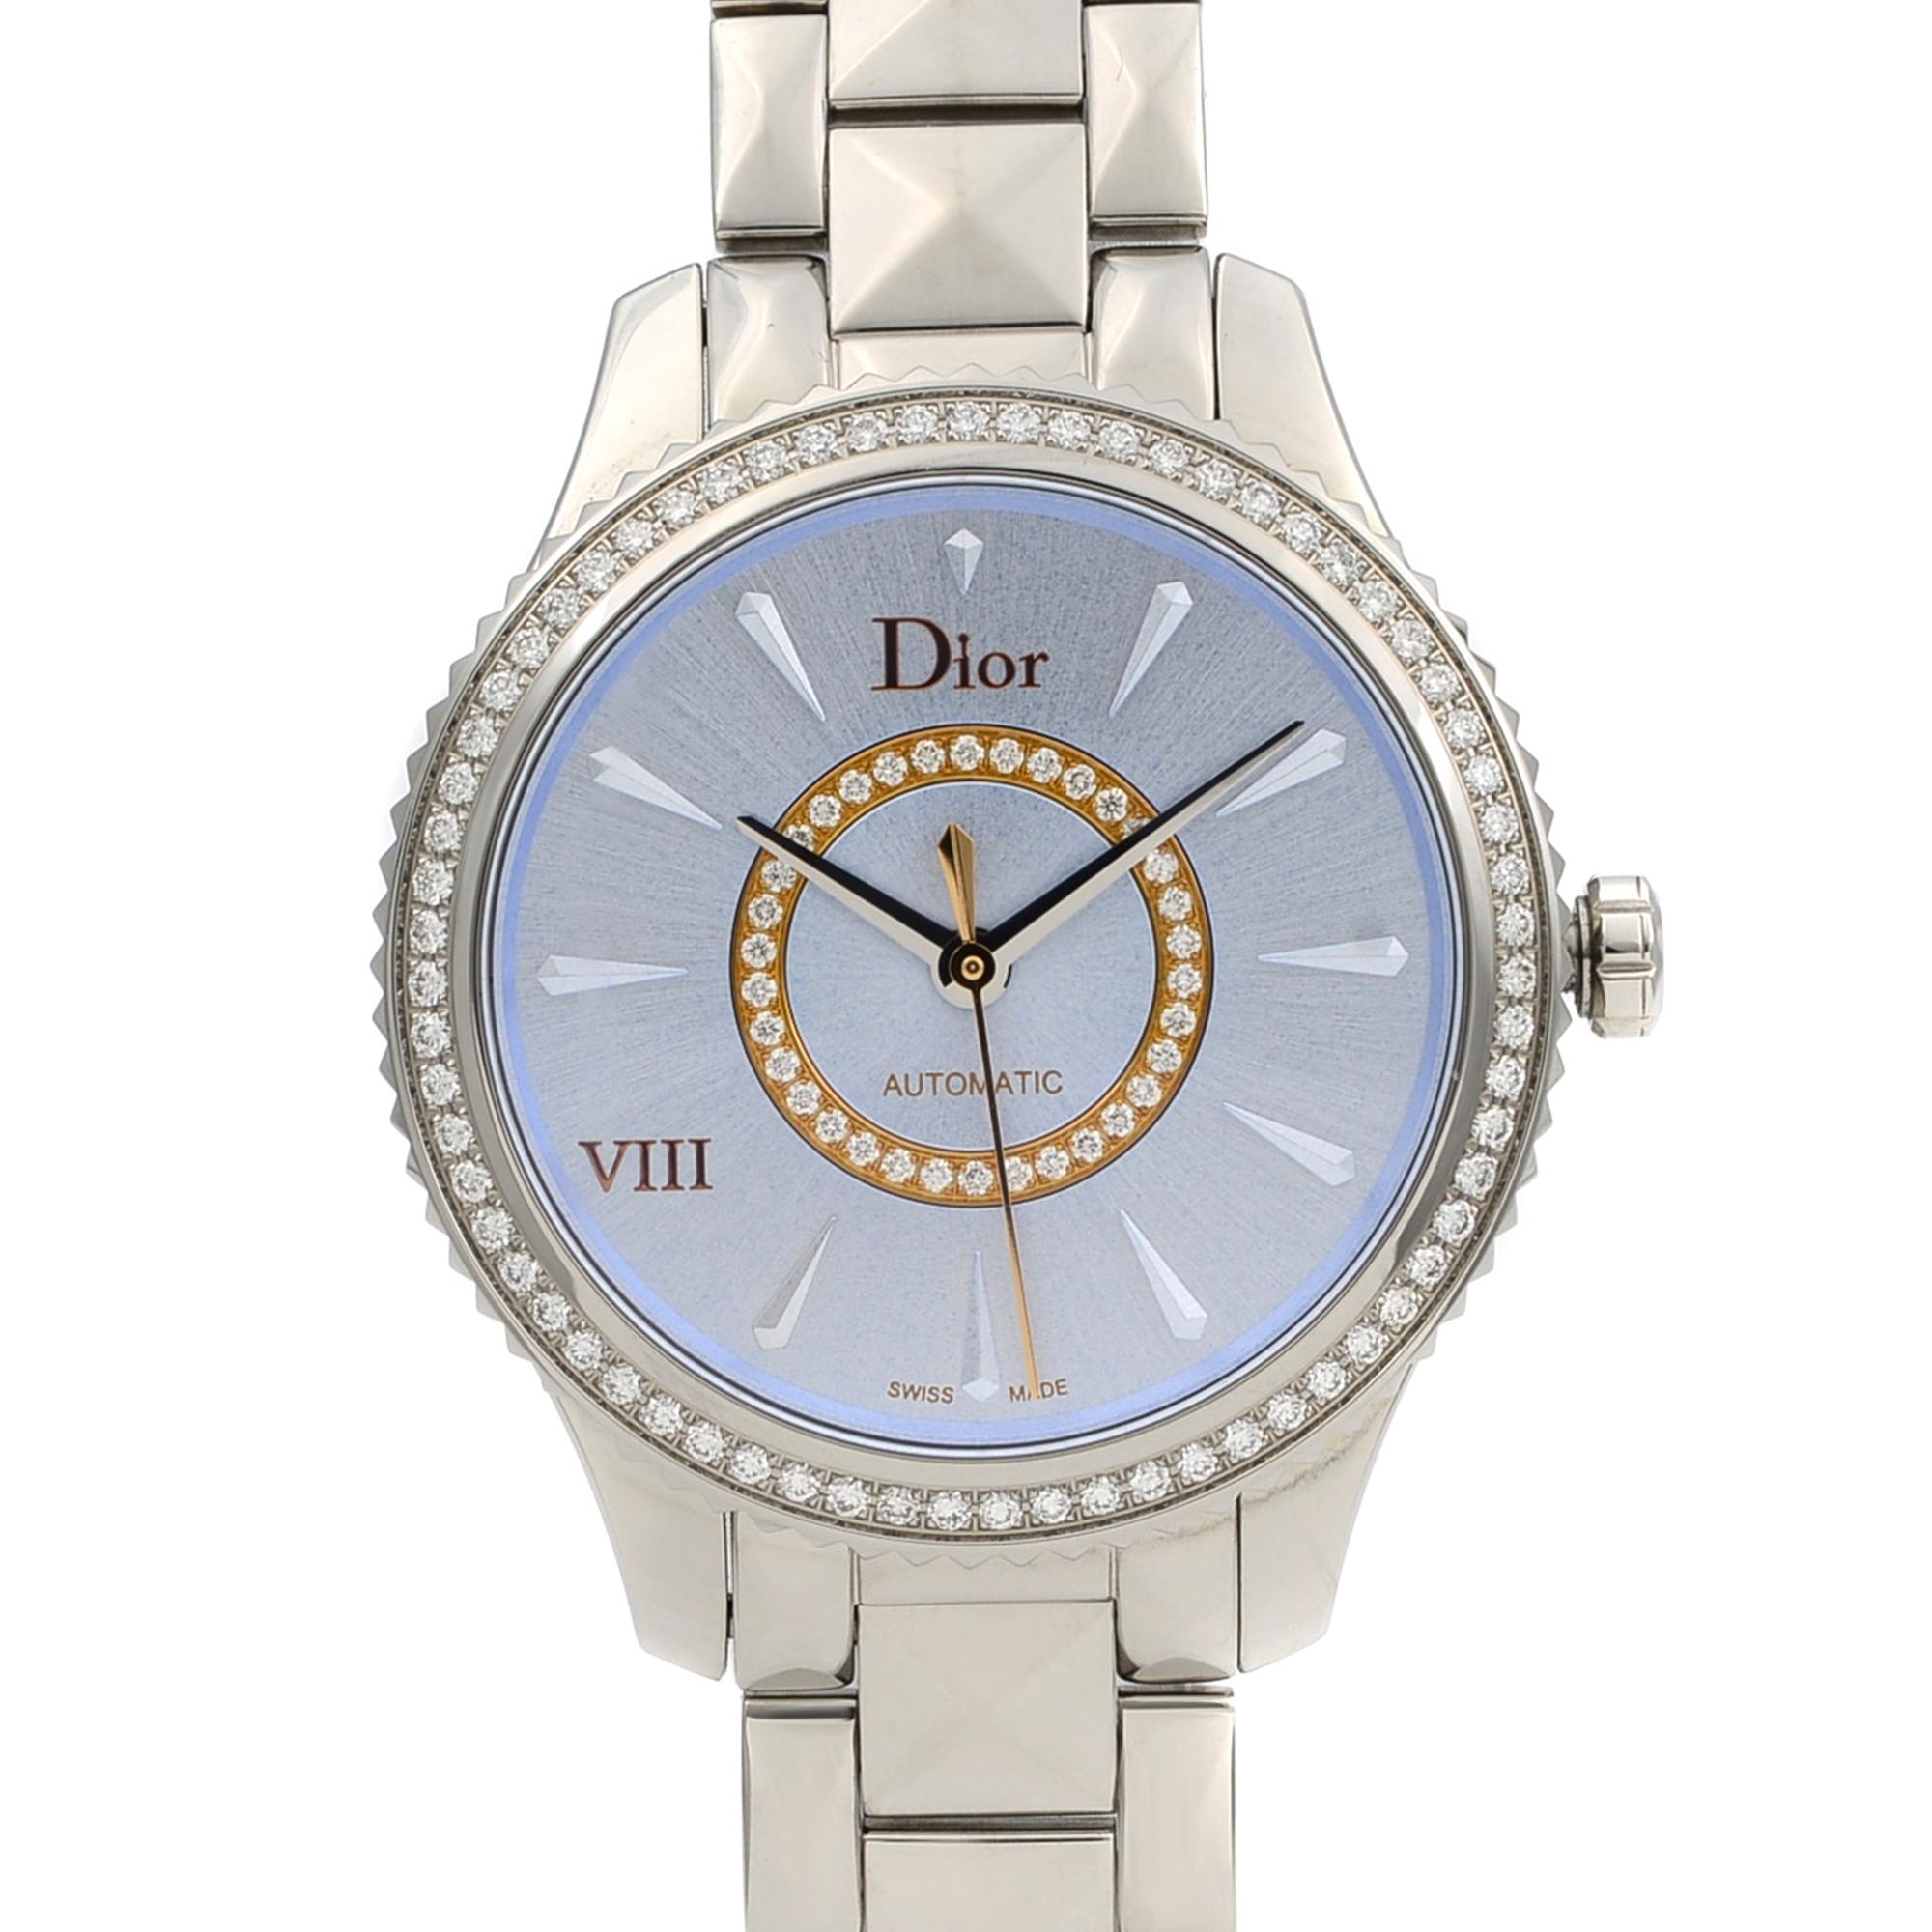 This watch is in flawless display model condition but comes without the manufacturer's box and papers. It is backed by a 3-year Chronostore warranty.

Sub-Category Details:

Brand: Dior
Model: Dior Montaigne
Model Number: CD152510M001
Movement: